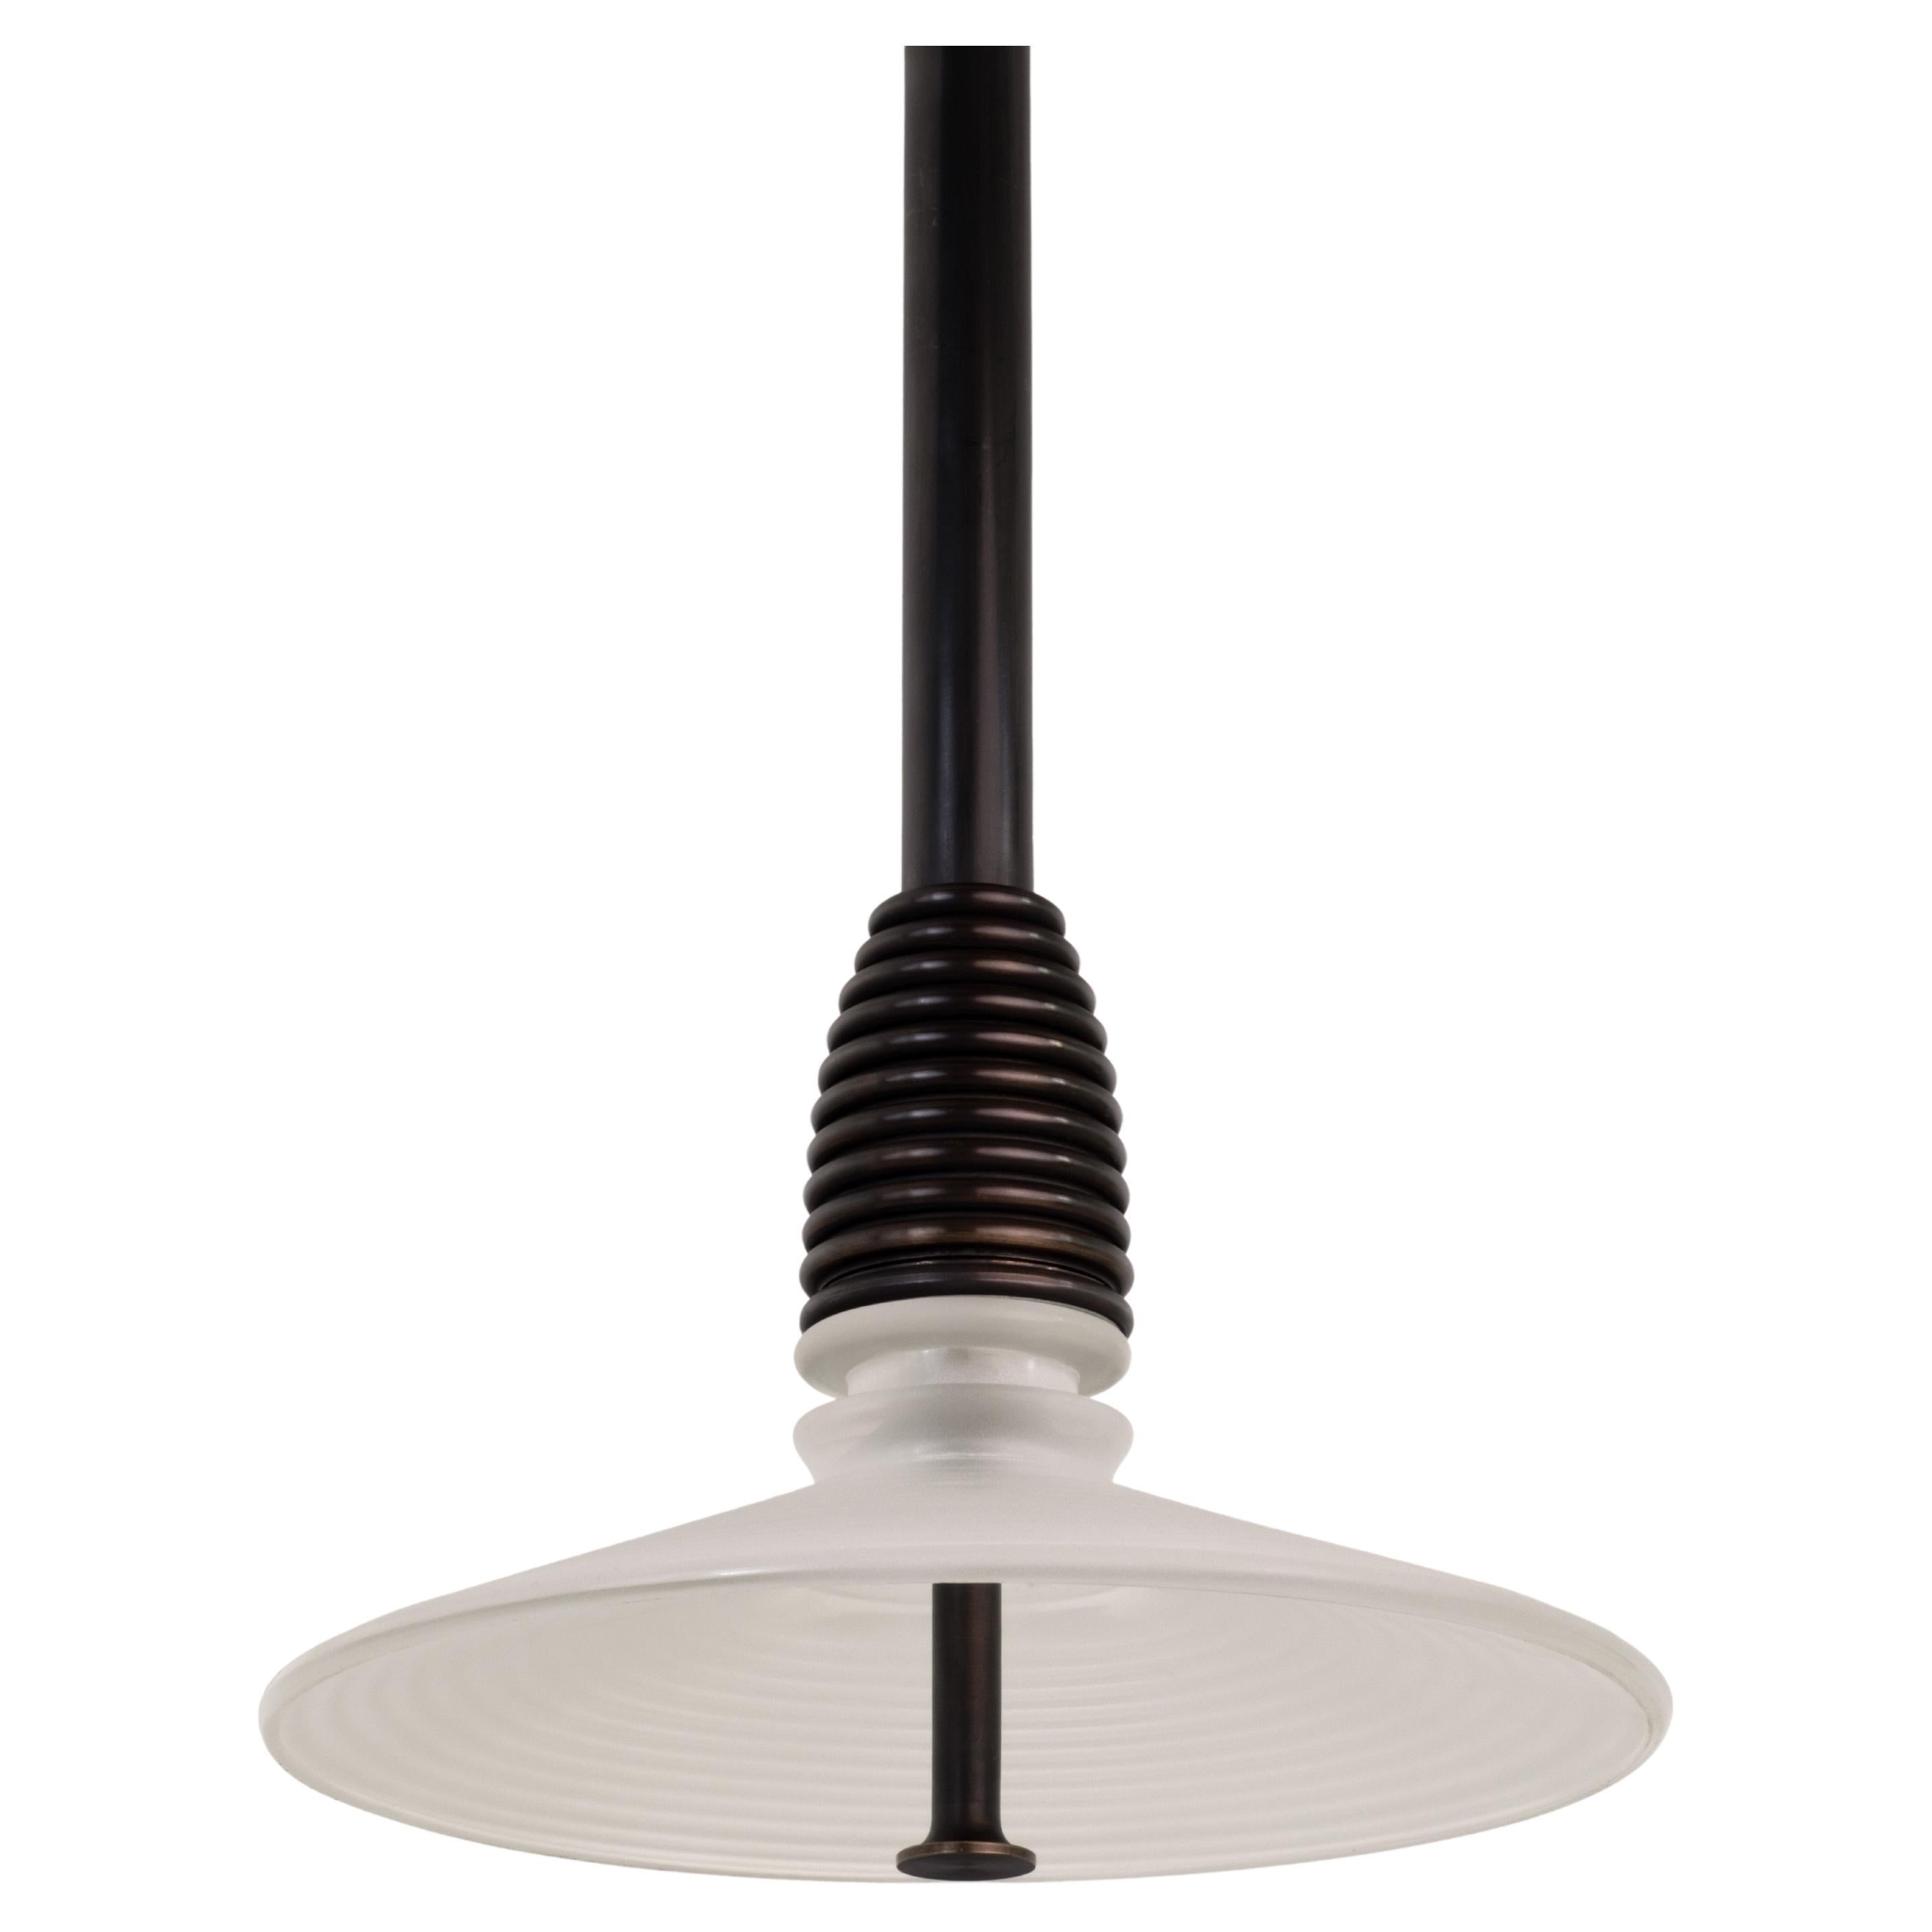 The Insulator 'B' Pendant in dark brass and frosted glass by NOVOCASTRIAN deco For Sale